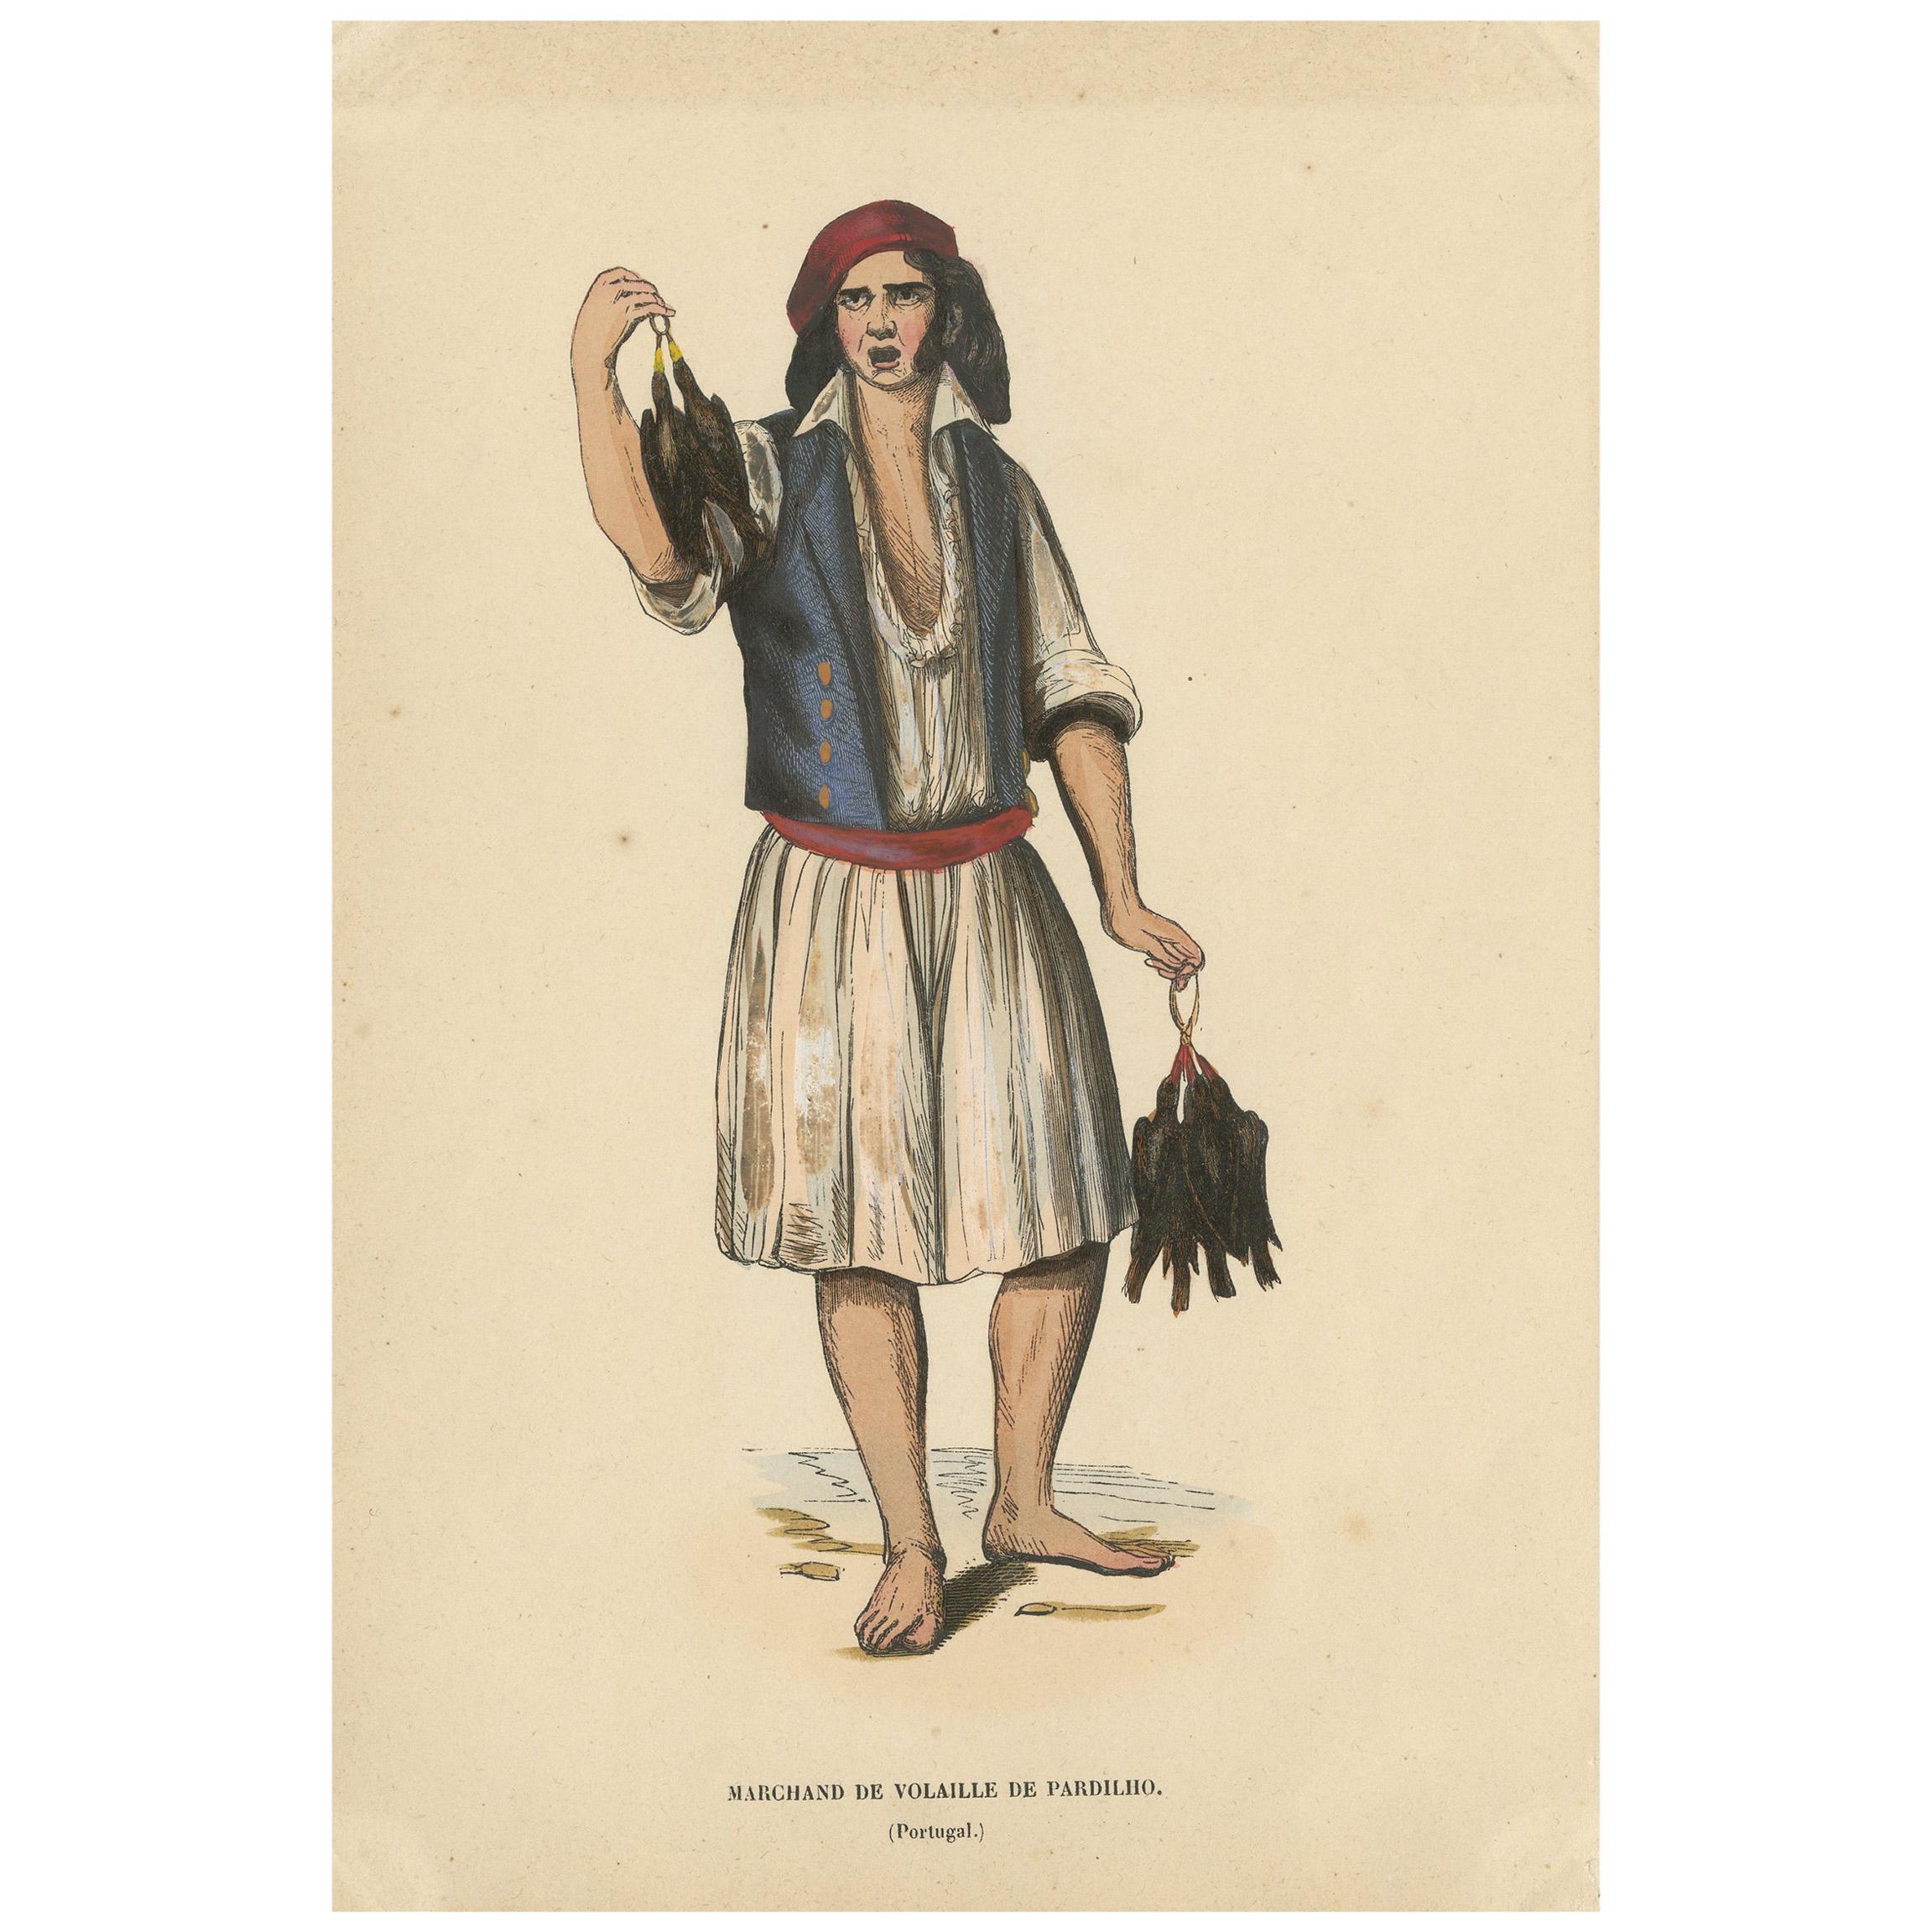 Antique Costume Print of a Poultry Merchant from Portugal by Wahlen, 1843